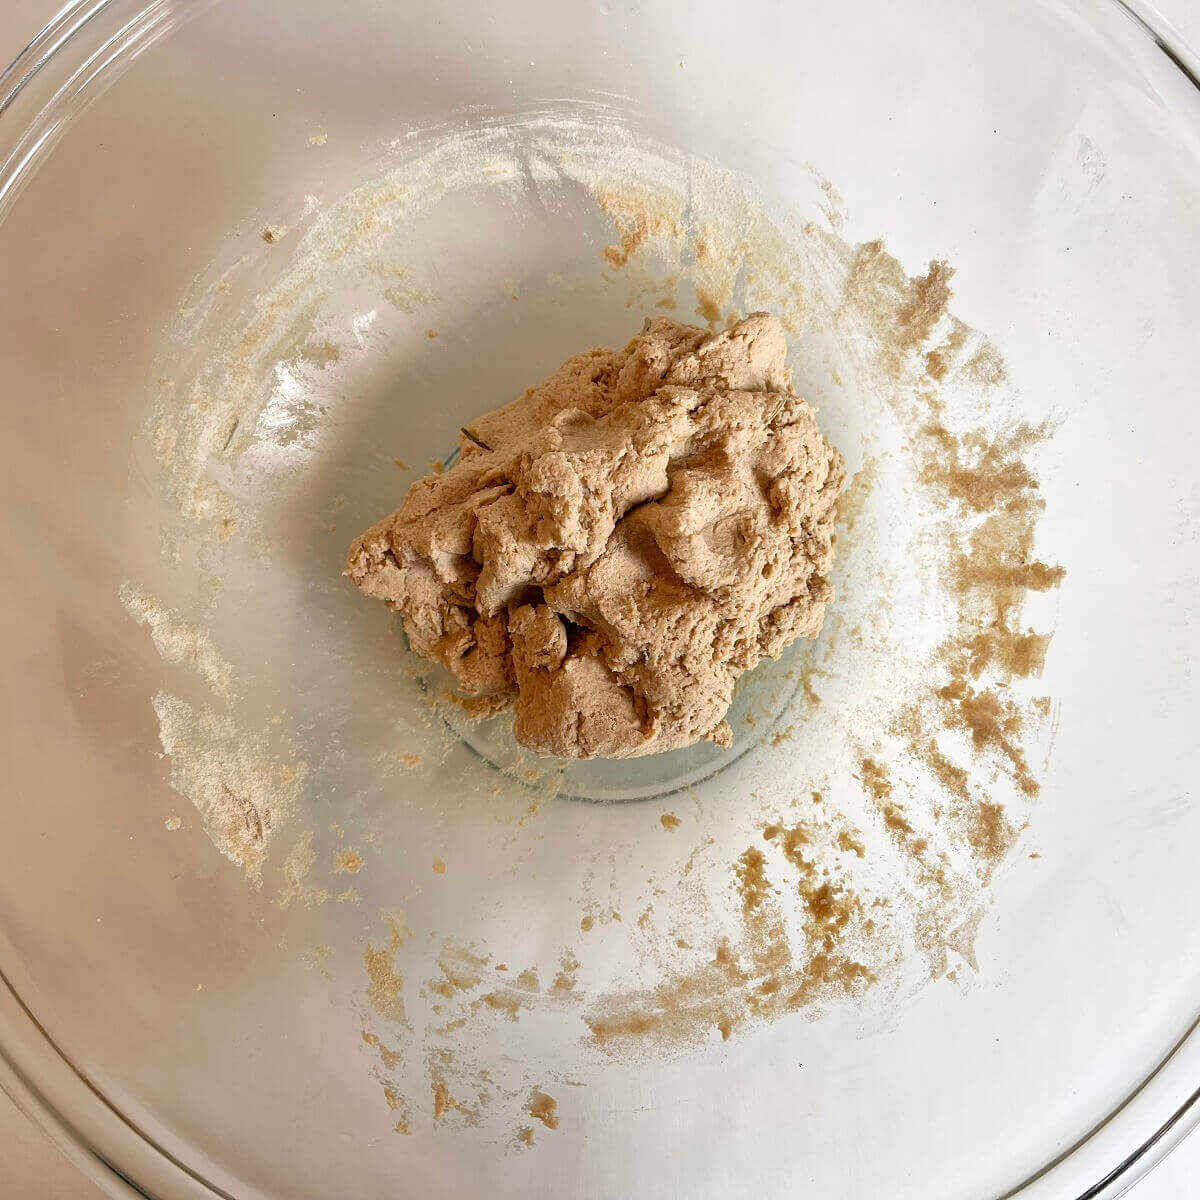 Raw amaranth dough in a glass mixing bowl.